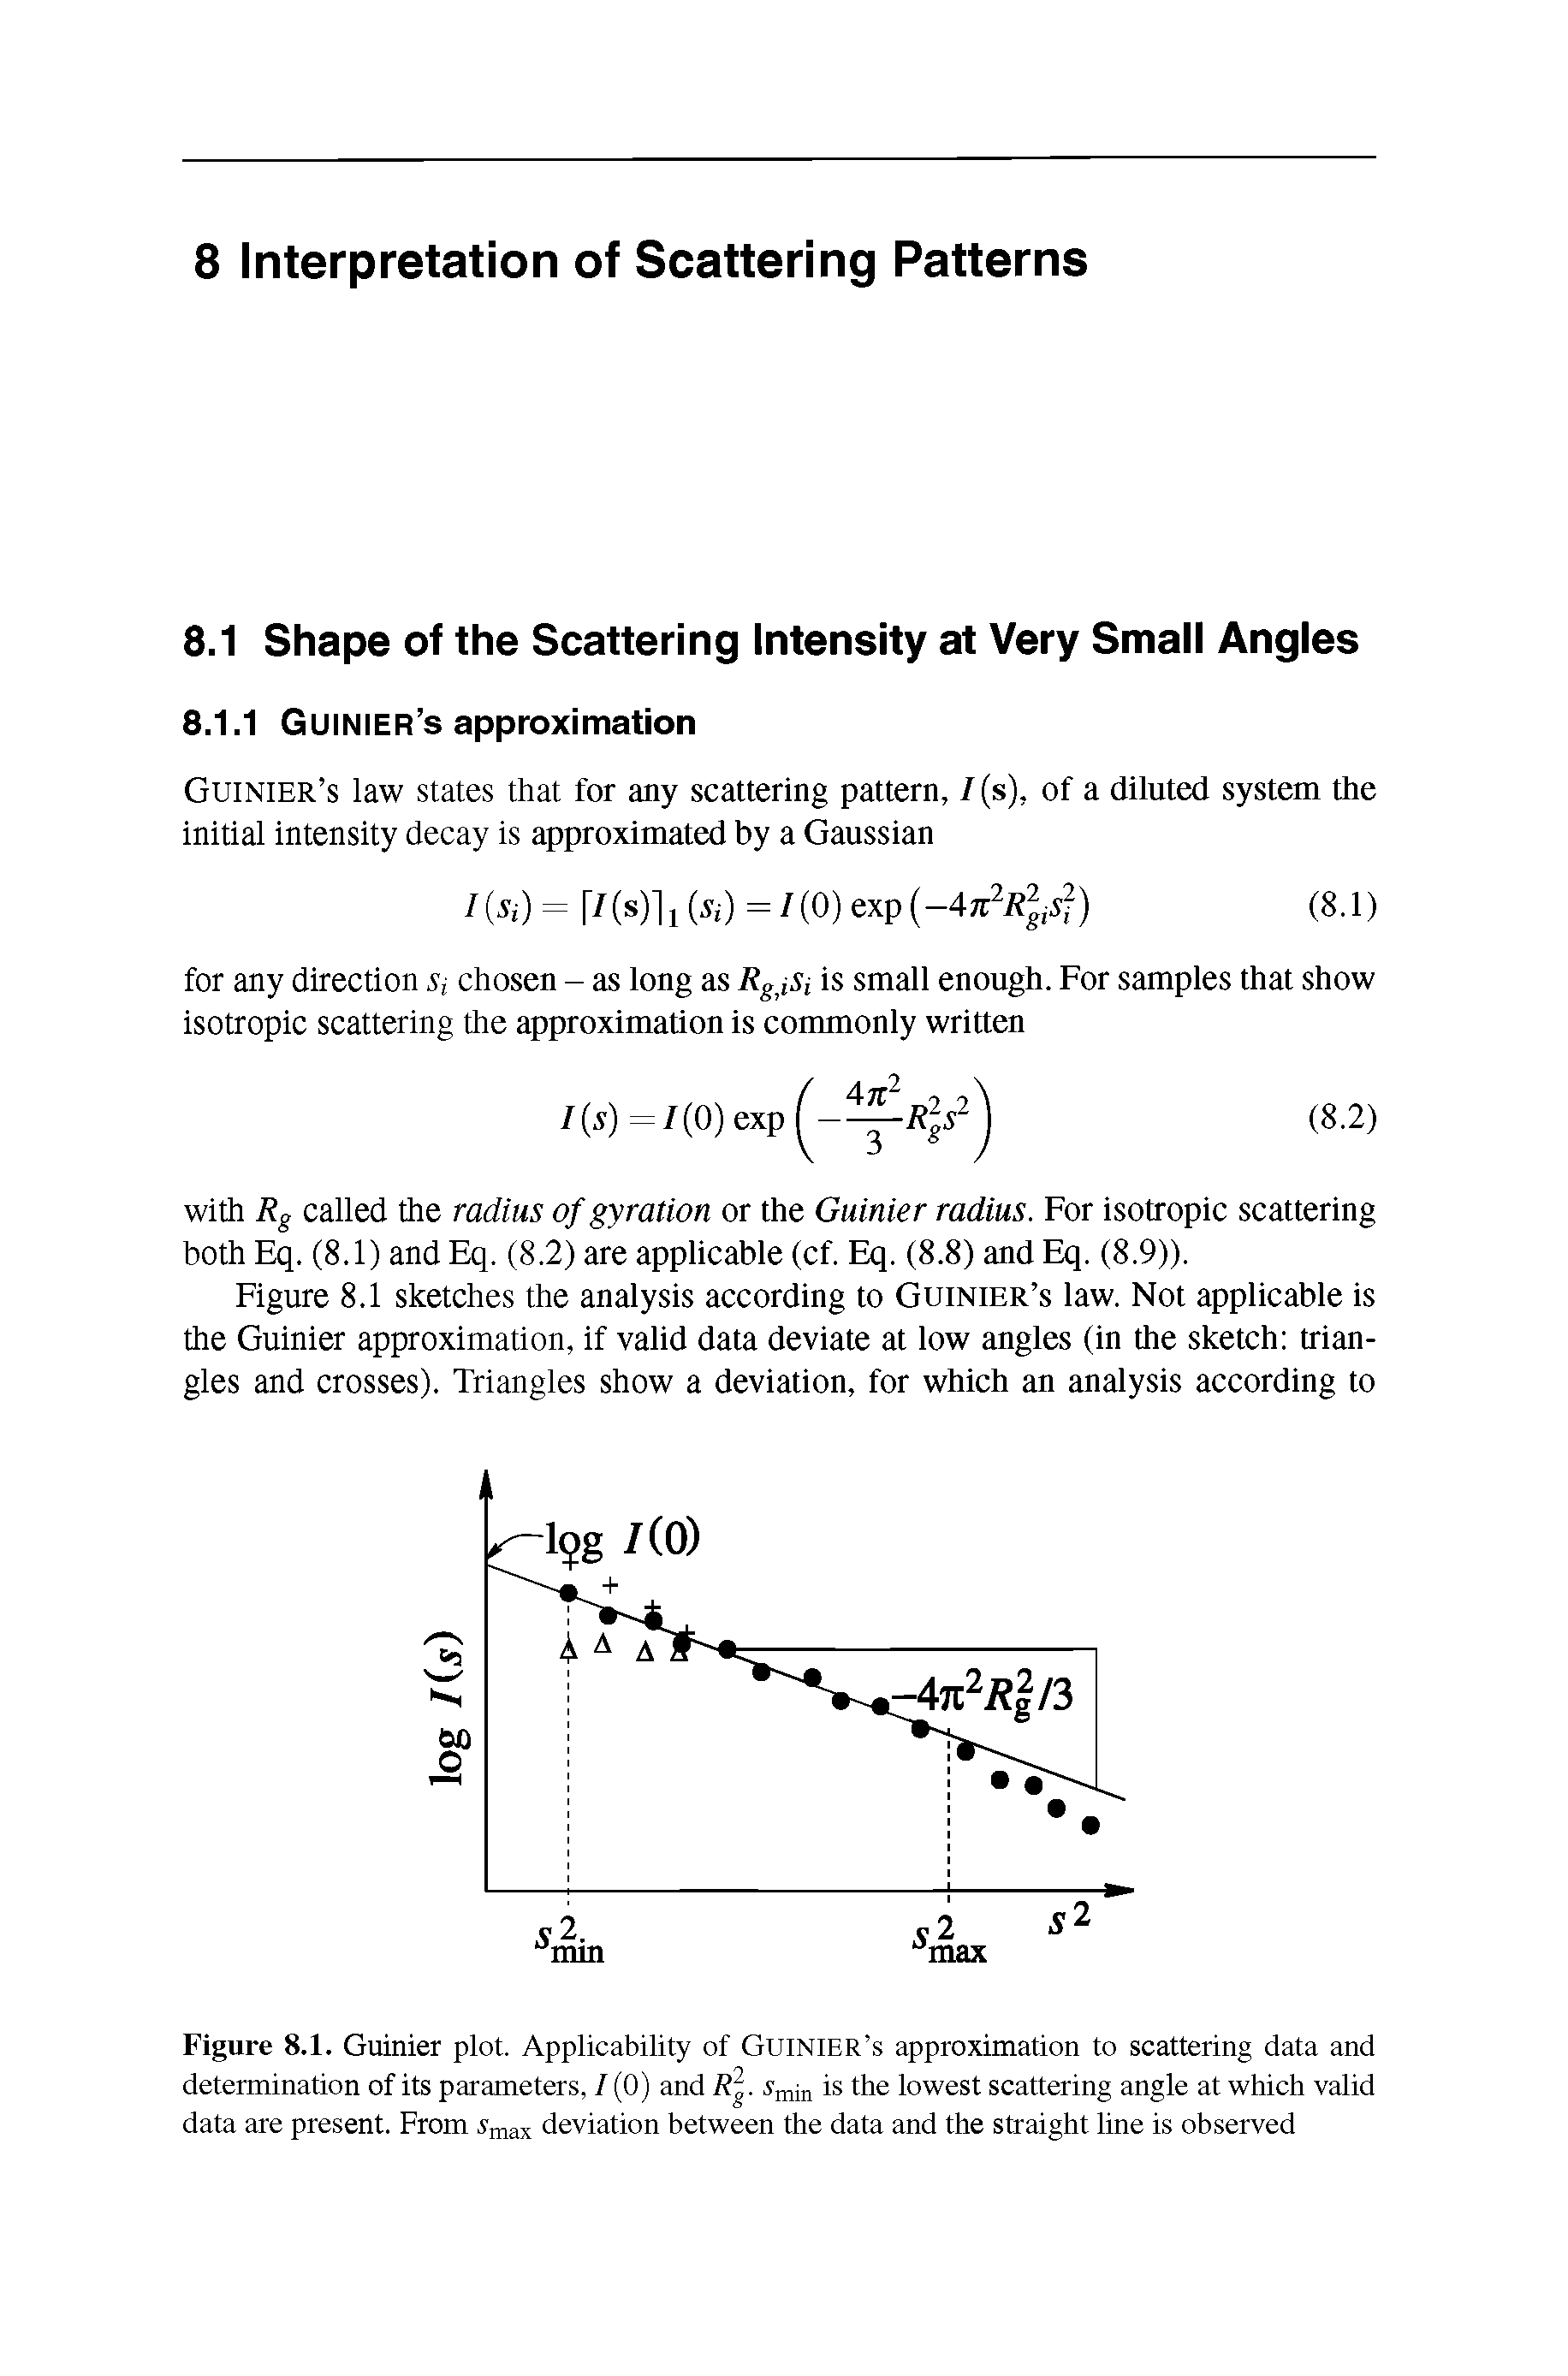 Figure 8.1. Guinier plot. Applicability of Guinier s approximation to scattering data and determination of its parameters, I (0) and Rg., smin is the lowest scattering angle at which valid data are present. From, smax deviation between the data and the straight line is observed...